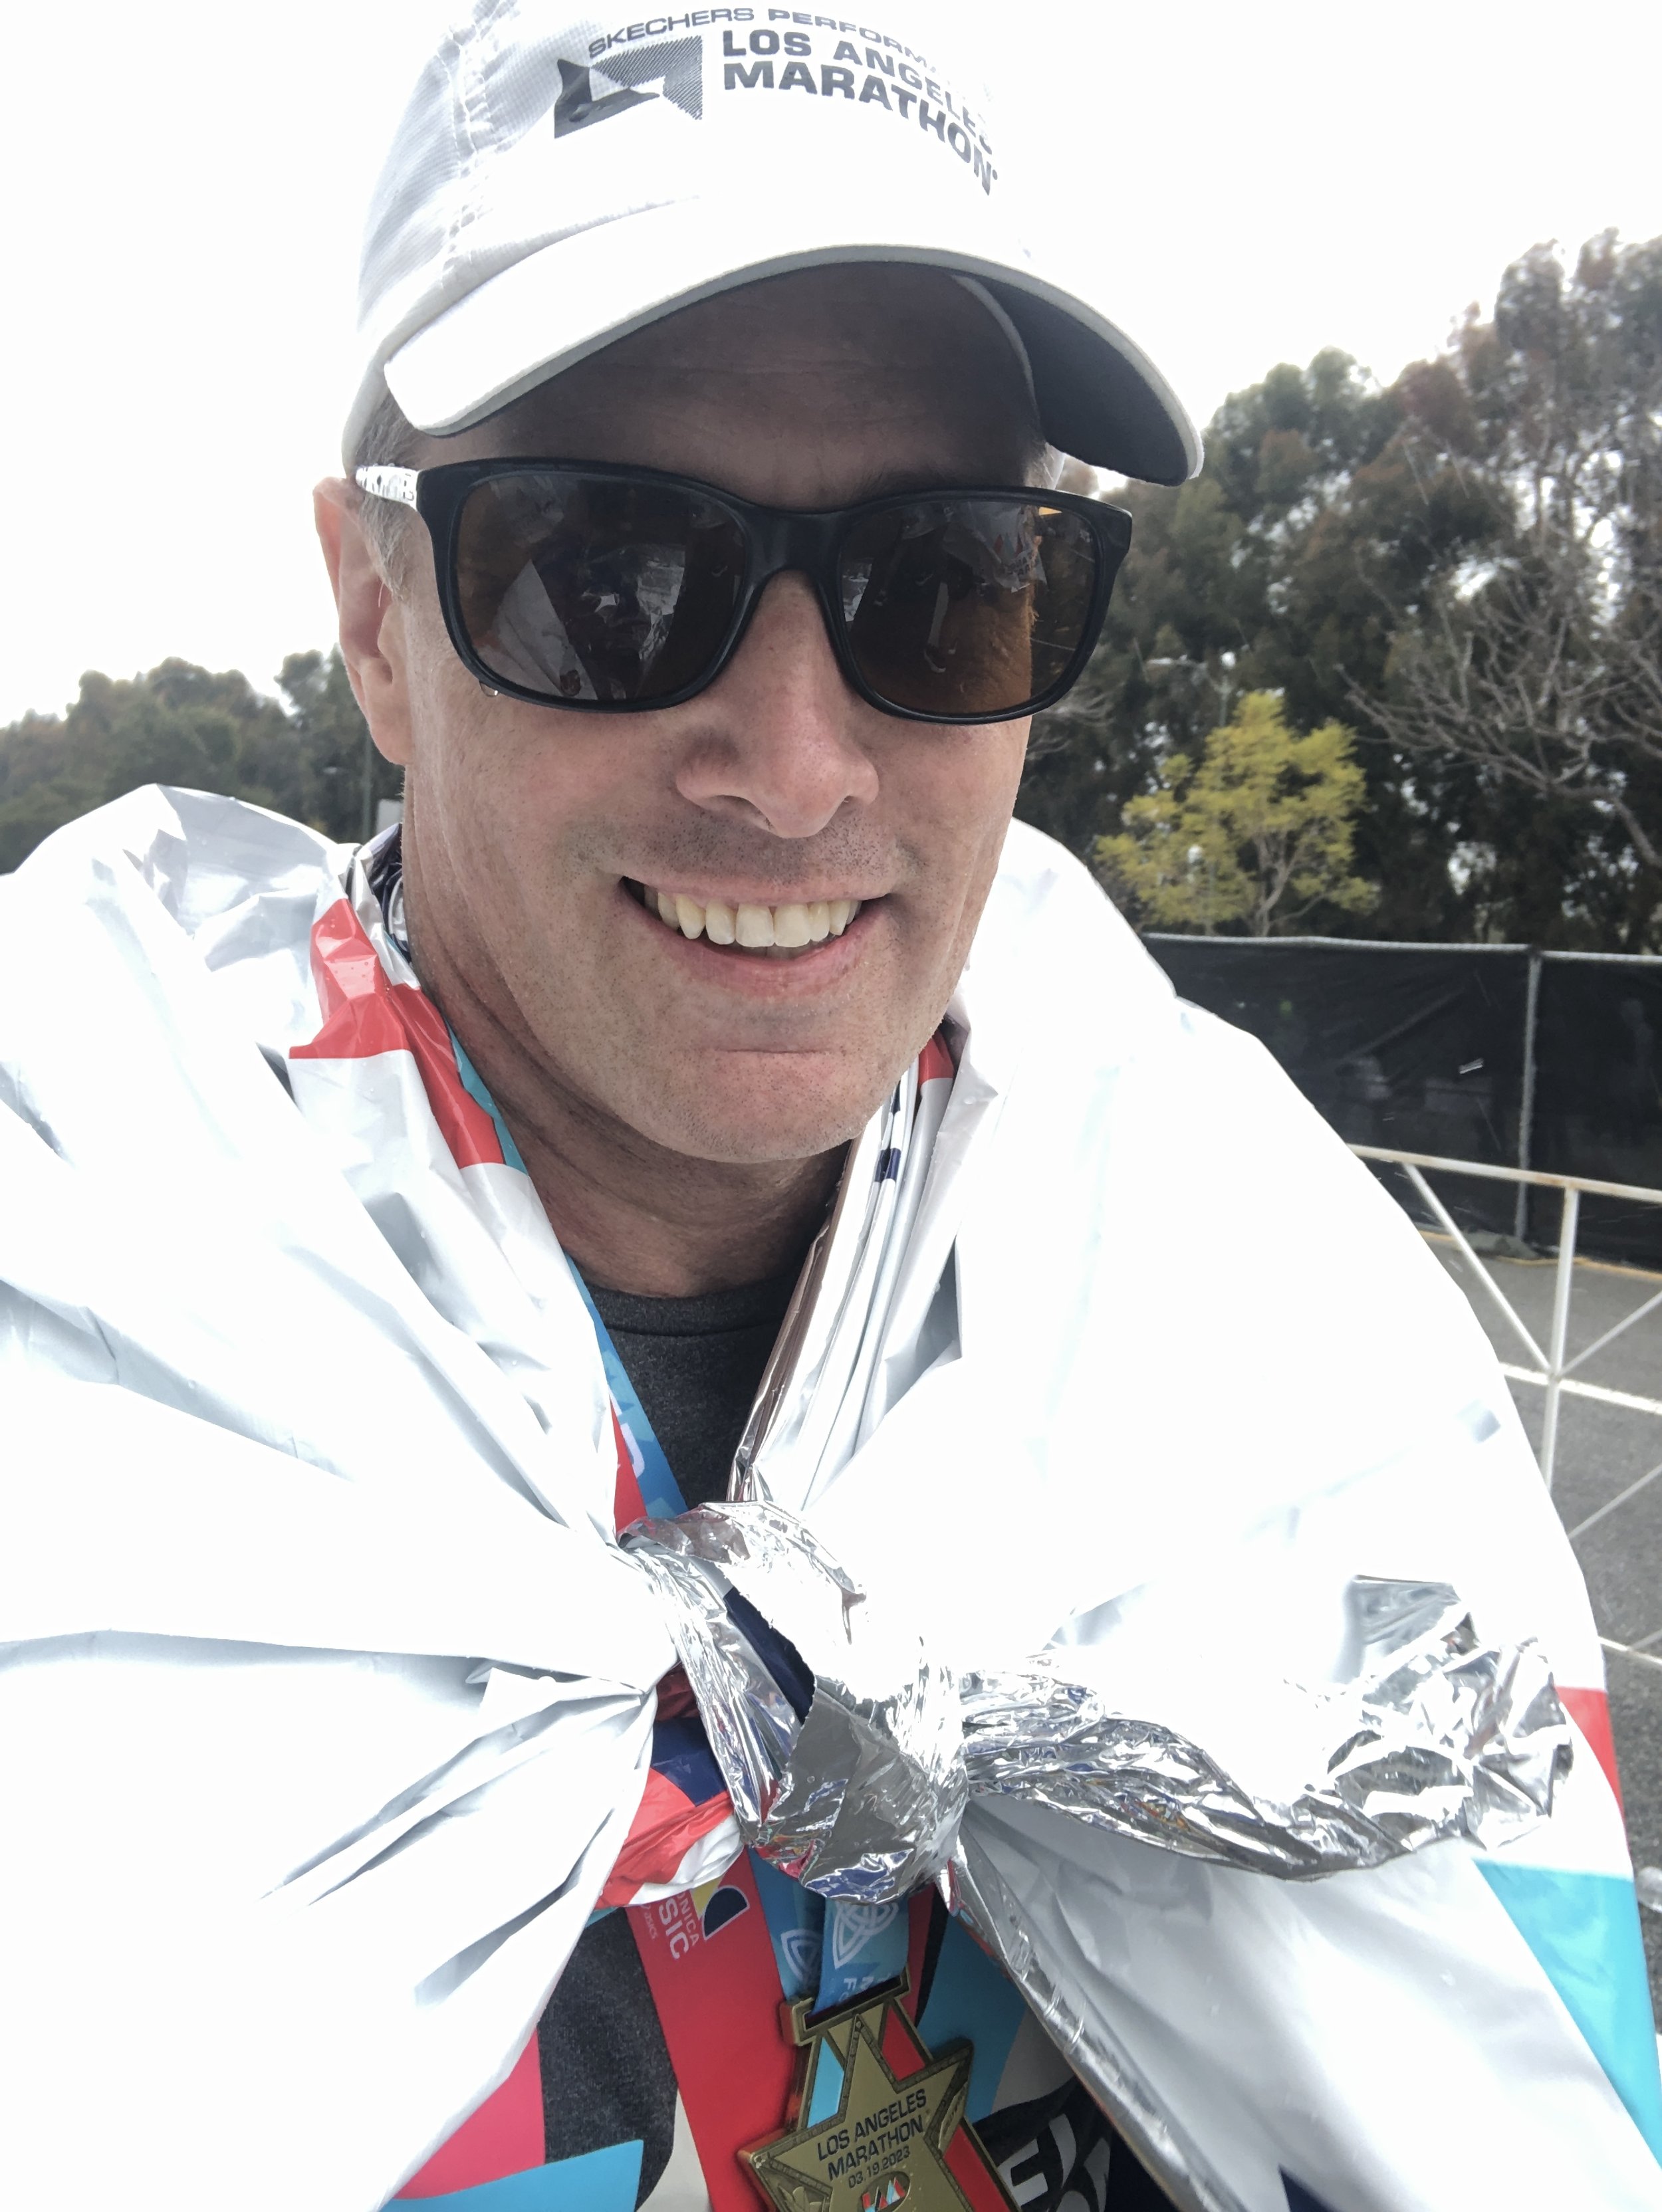 Space Blanket-A volunteer put this on me, which not only keeps you warm, but at that very moment it started to rain!